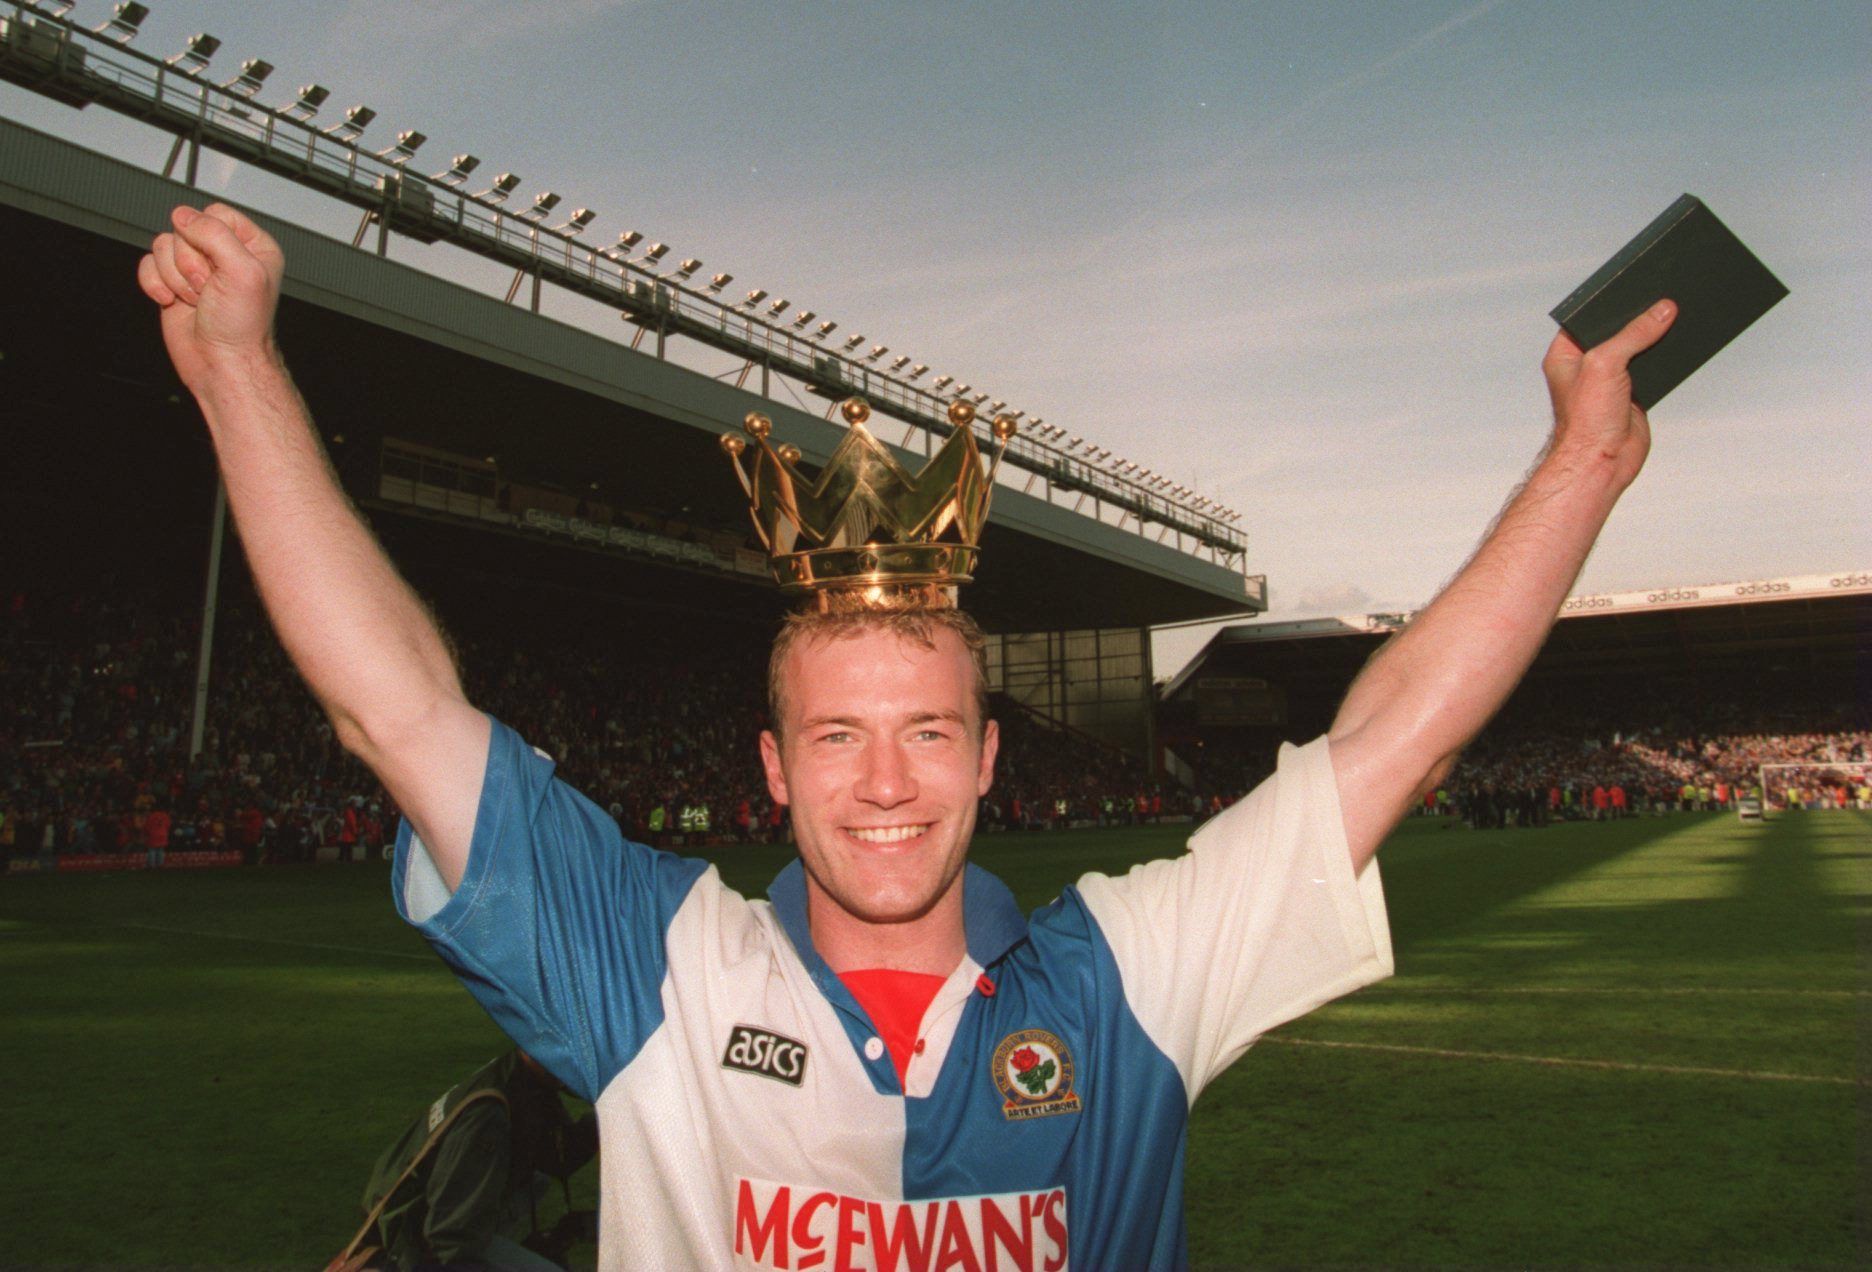 14 MAY 1995: BLACKBURN ROVERS STRIKER ALAN SHEARER CELEBRATES AFTER HIS TEAM CLINCHED THE LEAGUE TITLE AFTER THE GAME AGAINST LIVERPOOL.